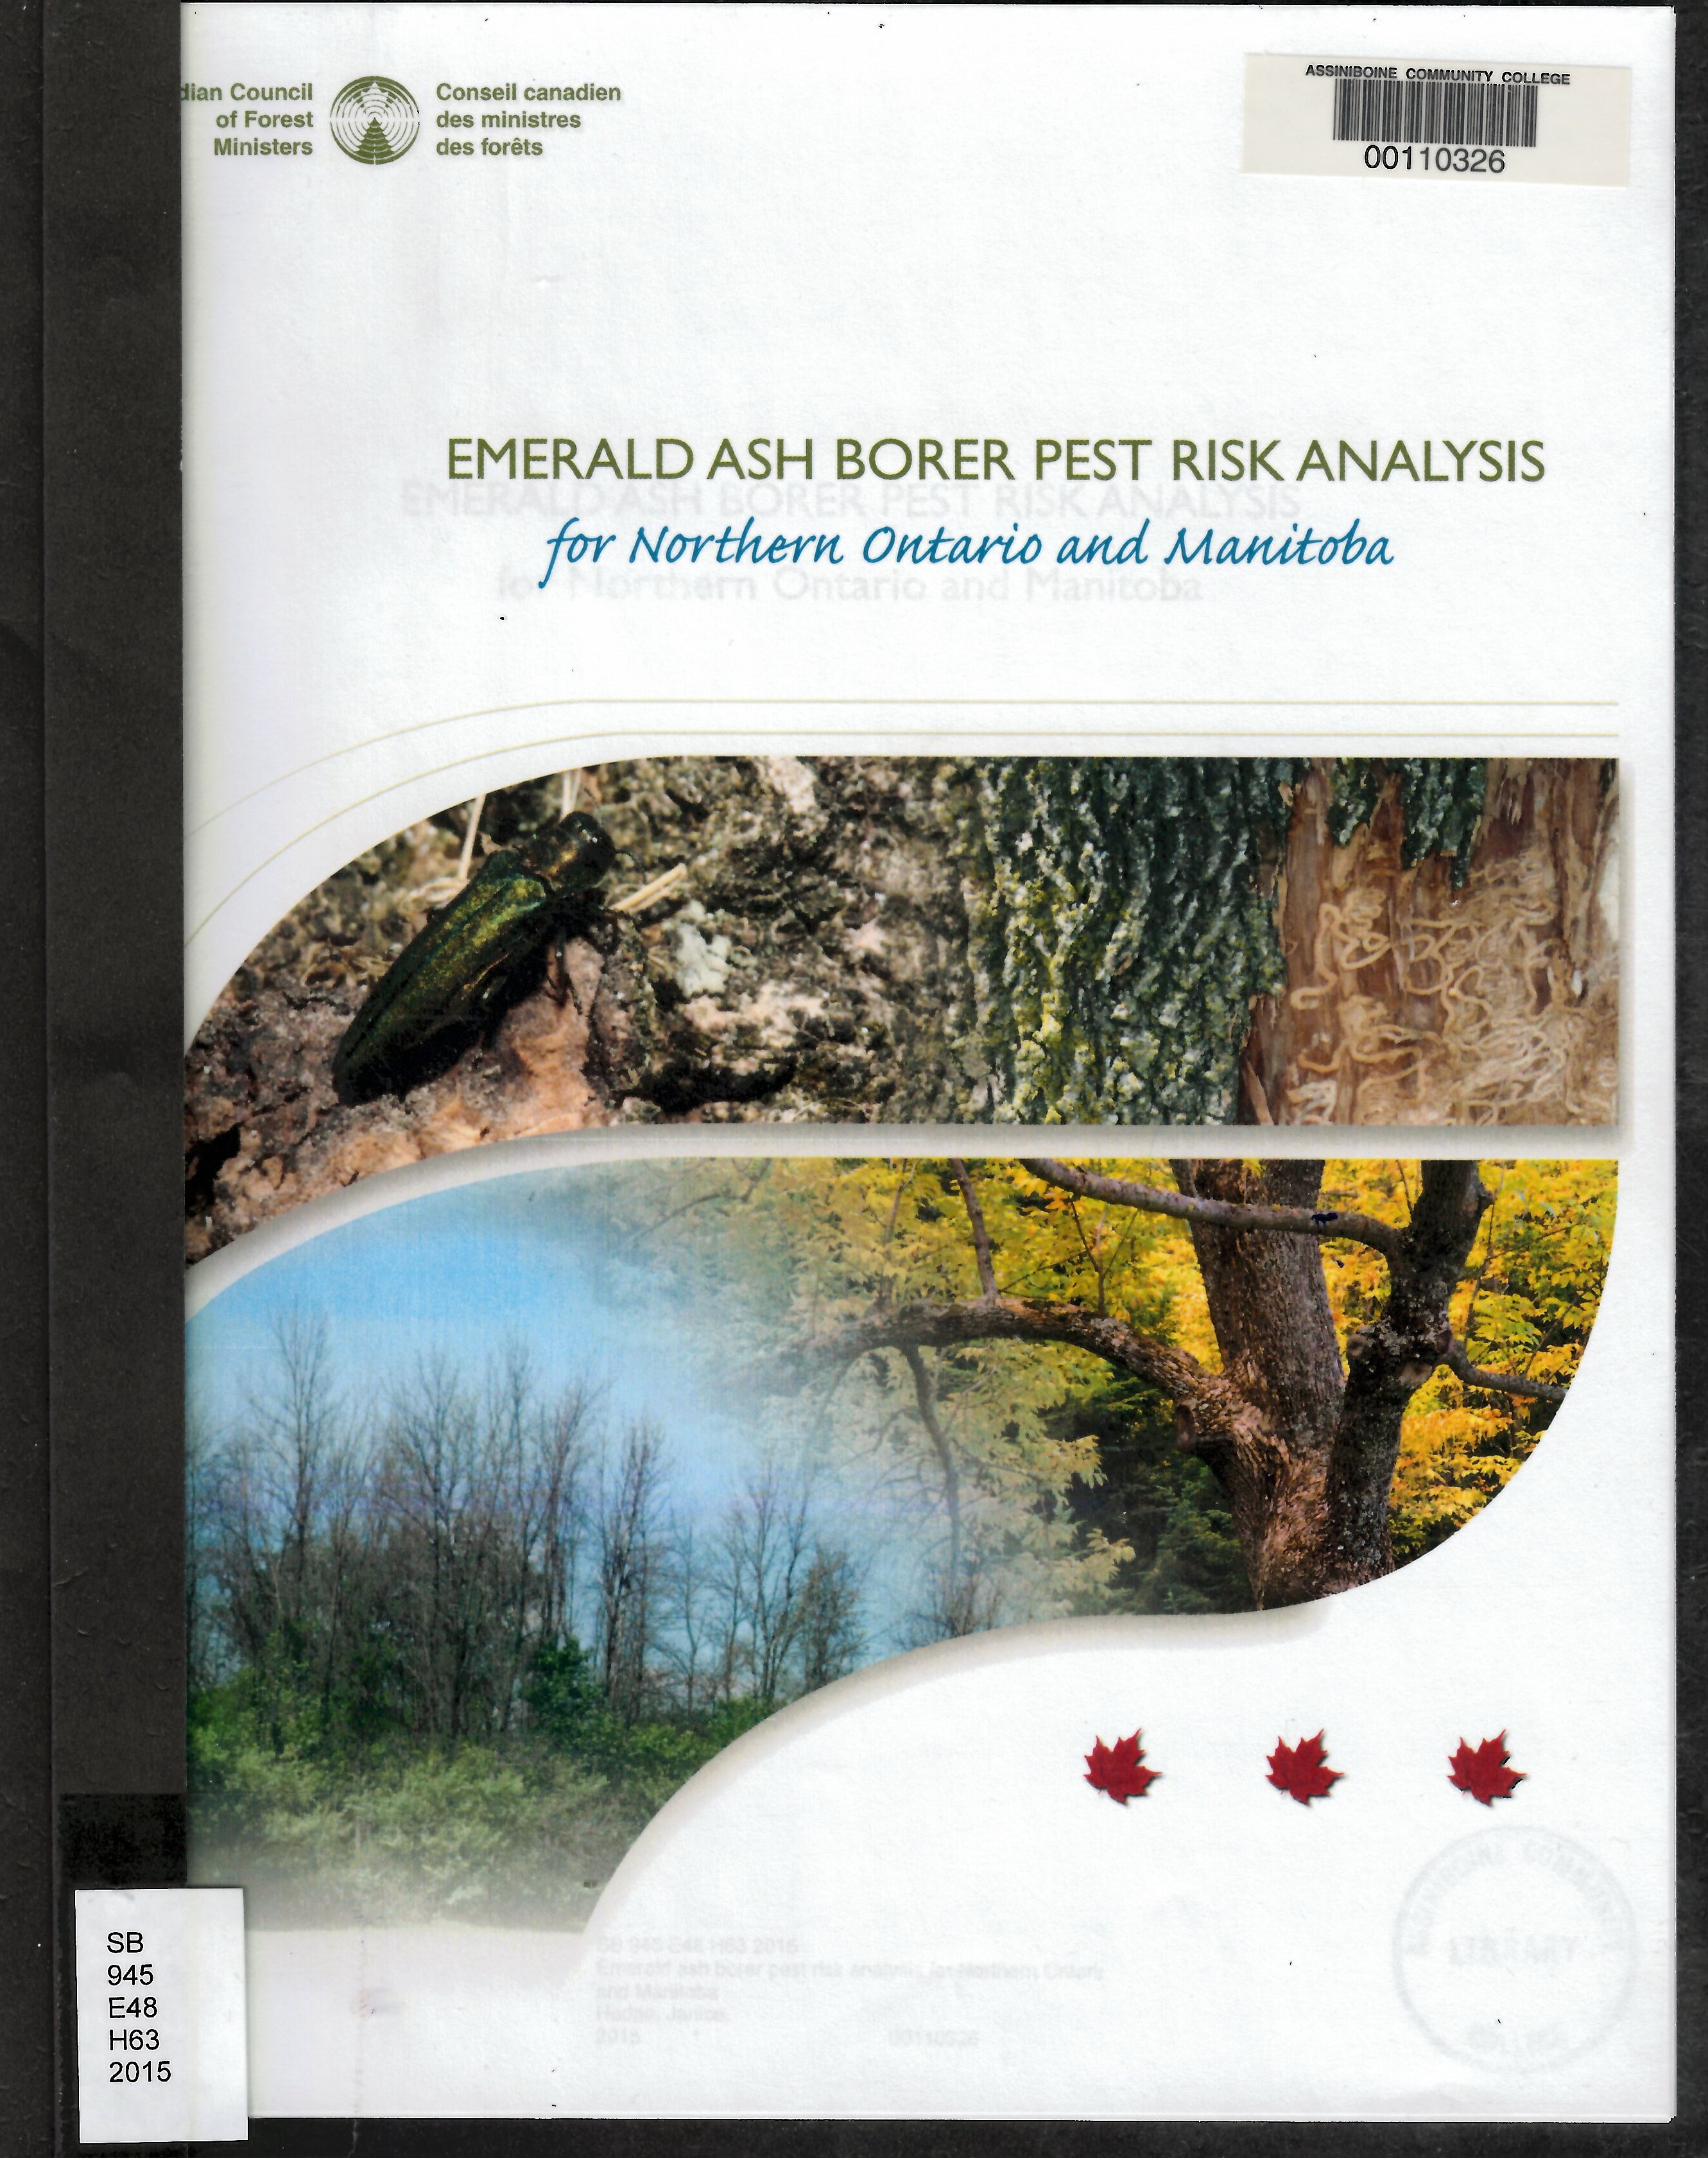 Emerald ash borer pest risk analysis for Northern Ontario and Manitoba